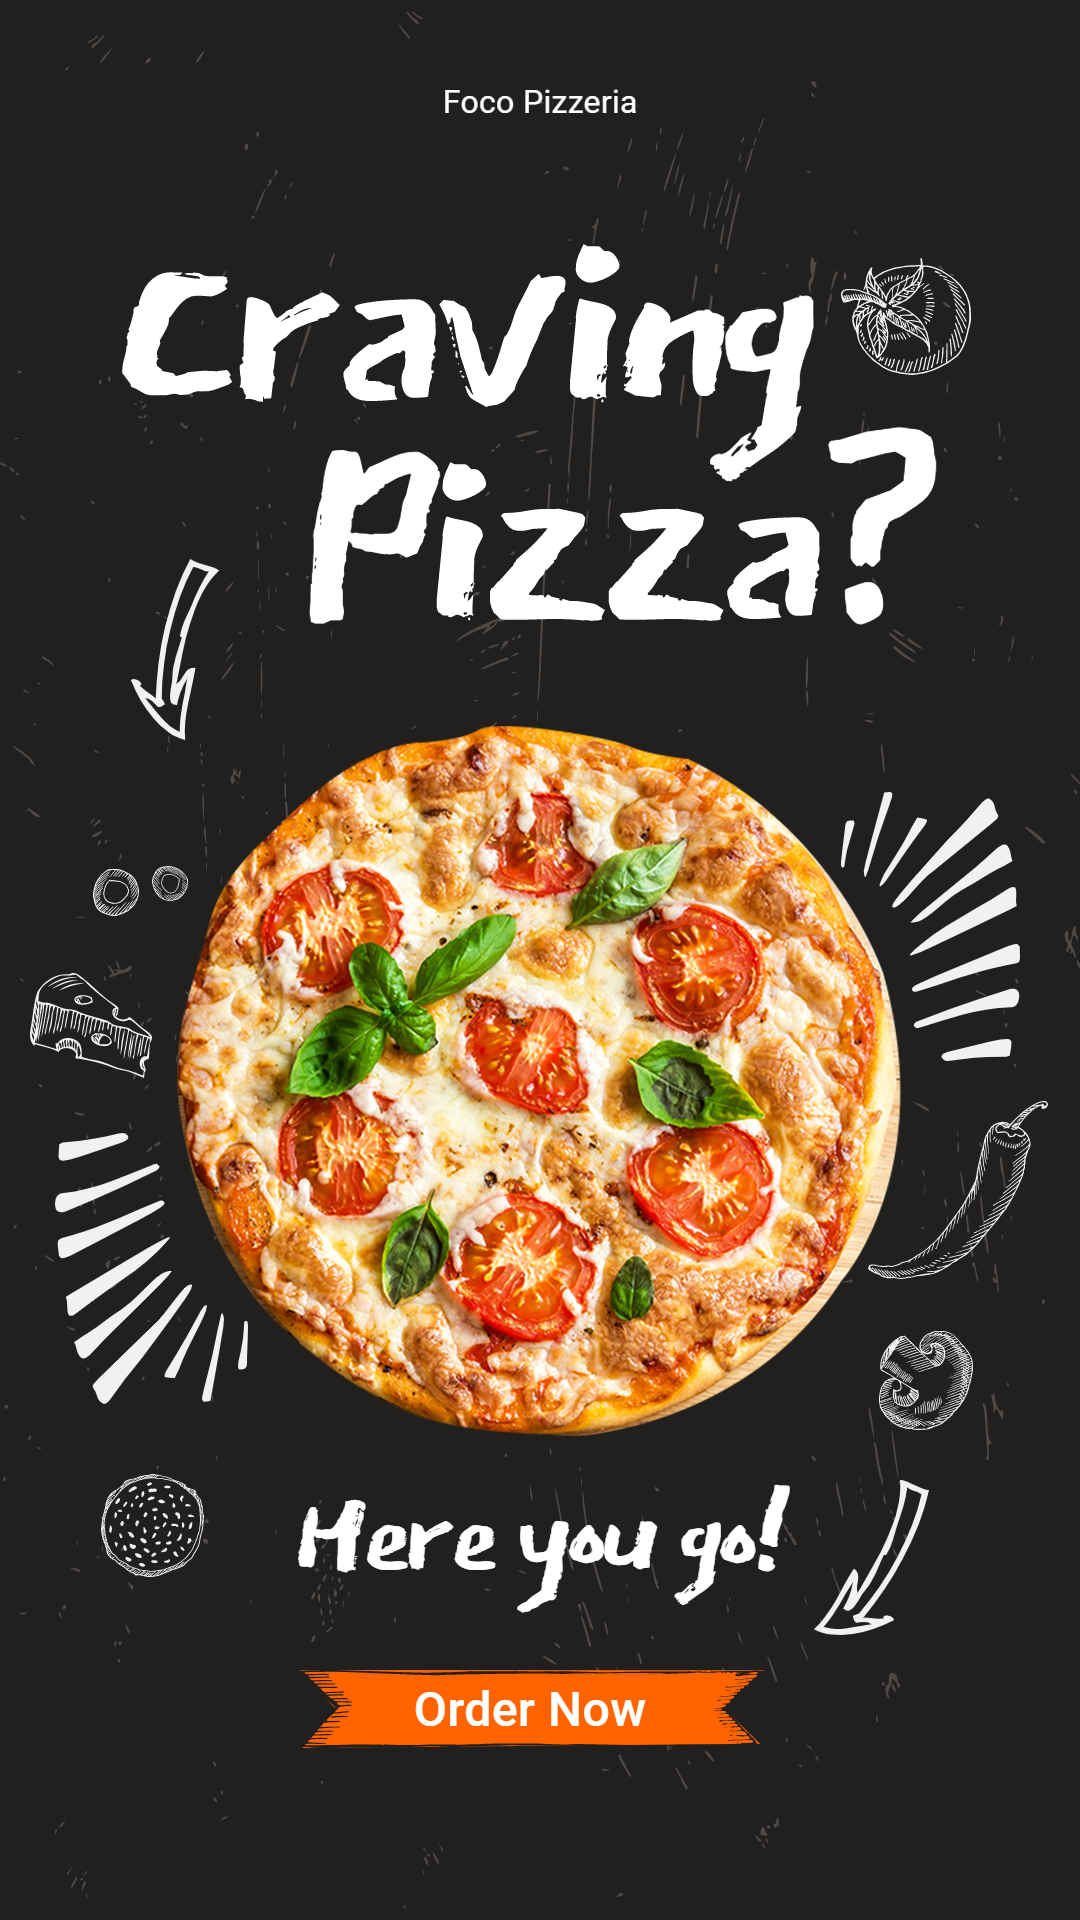 Creative Pizza Display Promotion Ecommerce Story预览效果